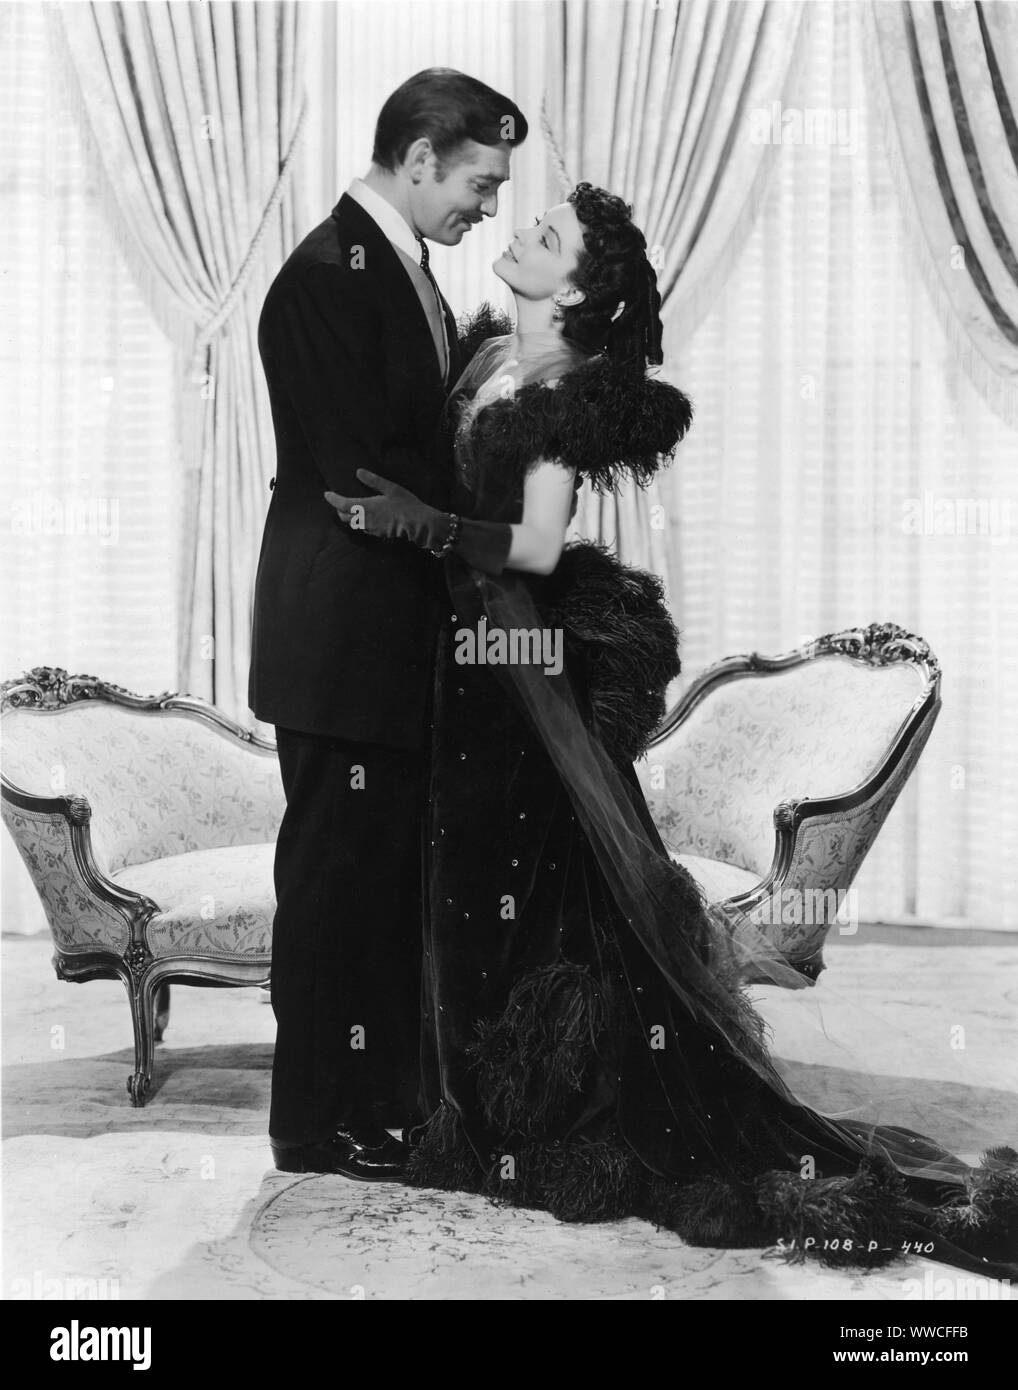 CLARK GABLE as Rhett Butler and VIVIEN LEIGH as Scarlett O'Hara in GONE WITH THE WIND 1939 director Victor Fleming novel Margaret Mitchell producer David O. Selznick Selznick International Pictures / Metro Goldwyn Mayer Stock Photo